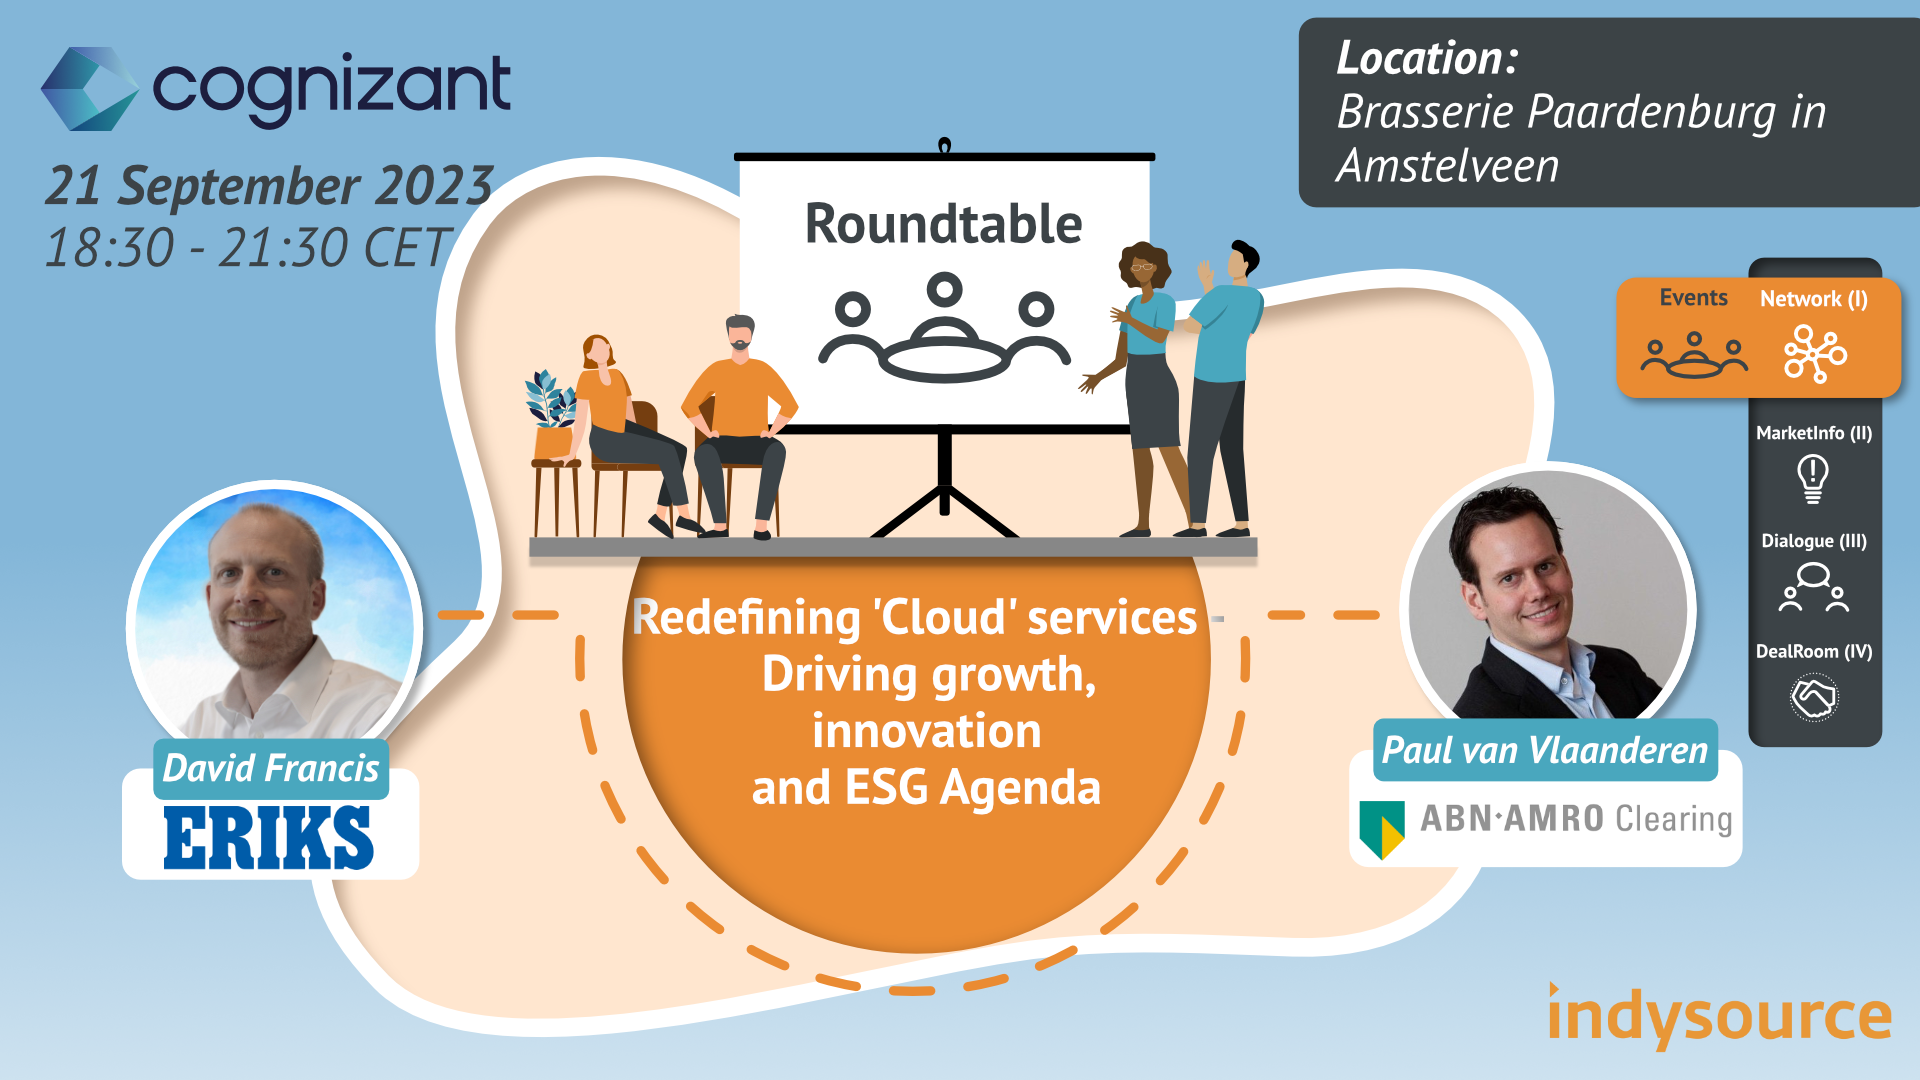 Cognizant Redefining ‘Cloud’ services - Driving growth, innovation and ESG agenda